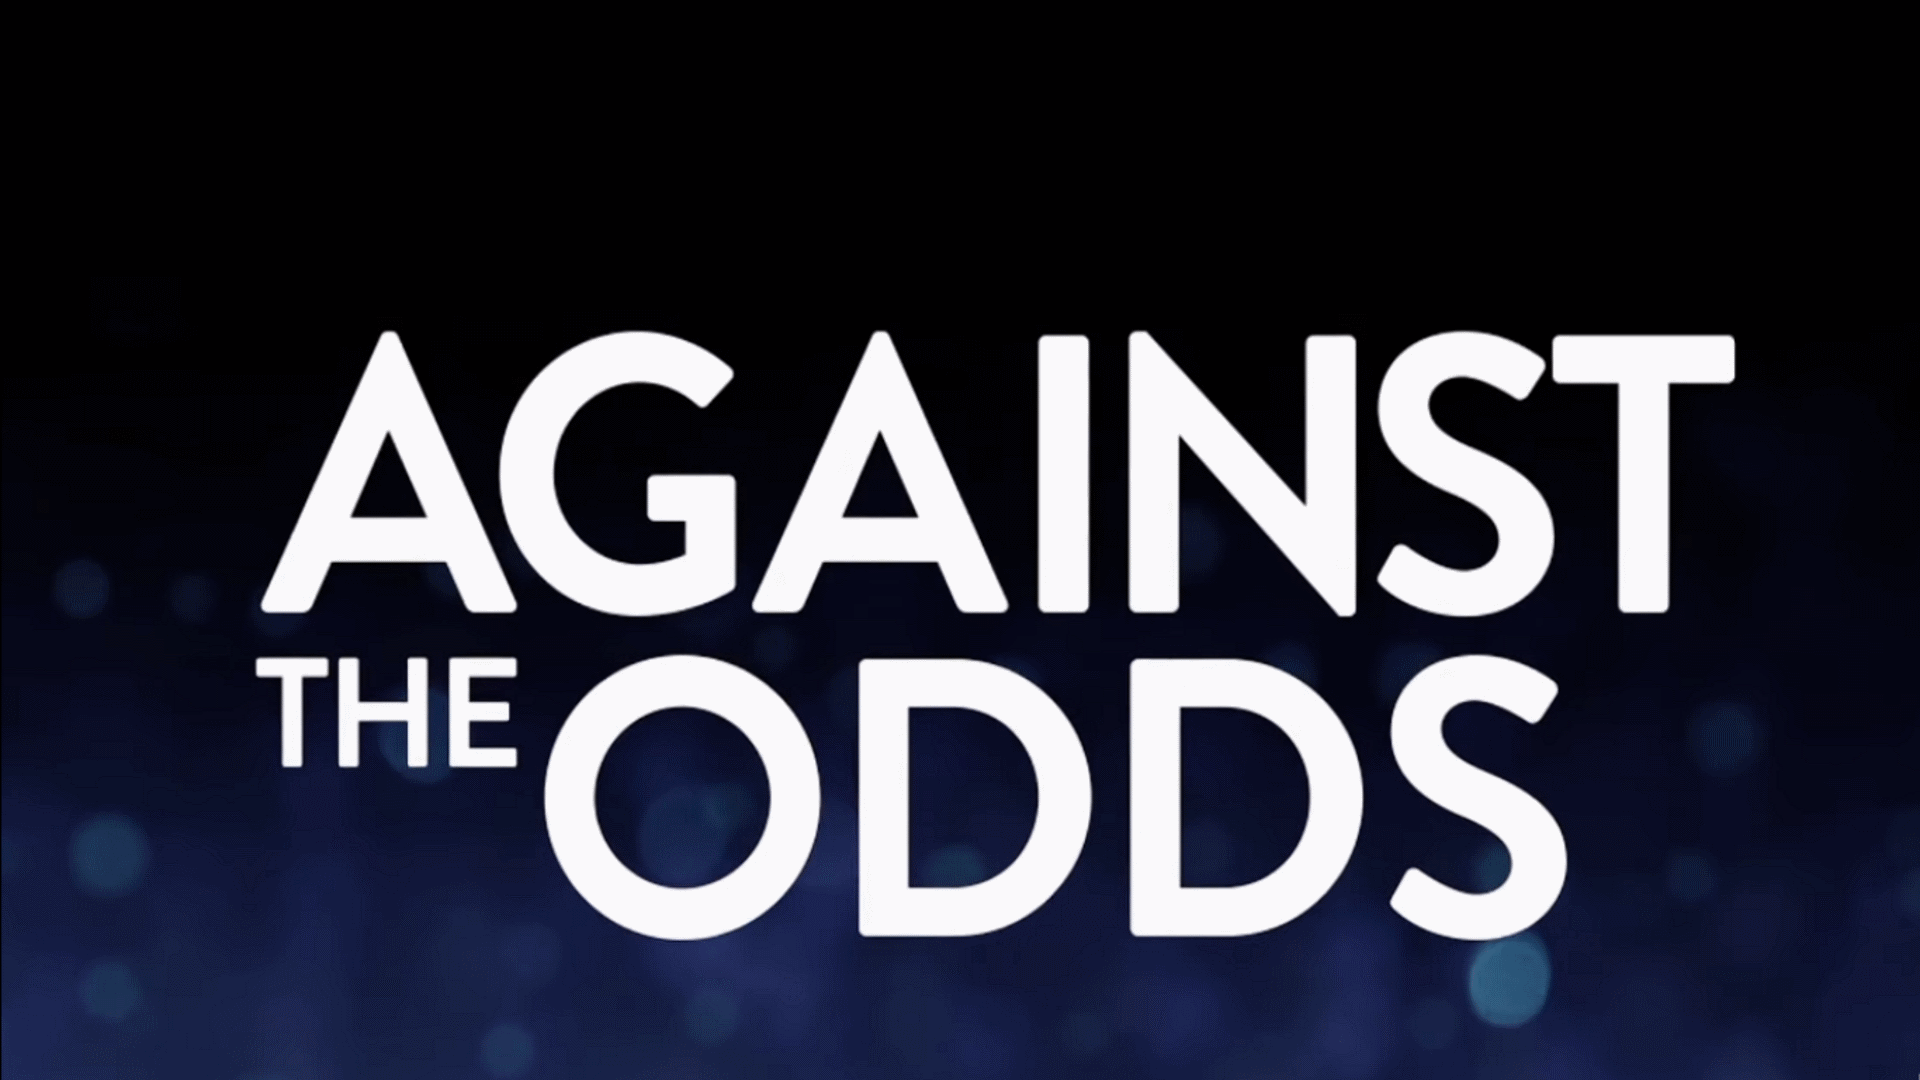 Red Bull feature documentary, "Against the Odds" debut in - BunnyGaming.com